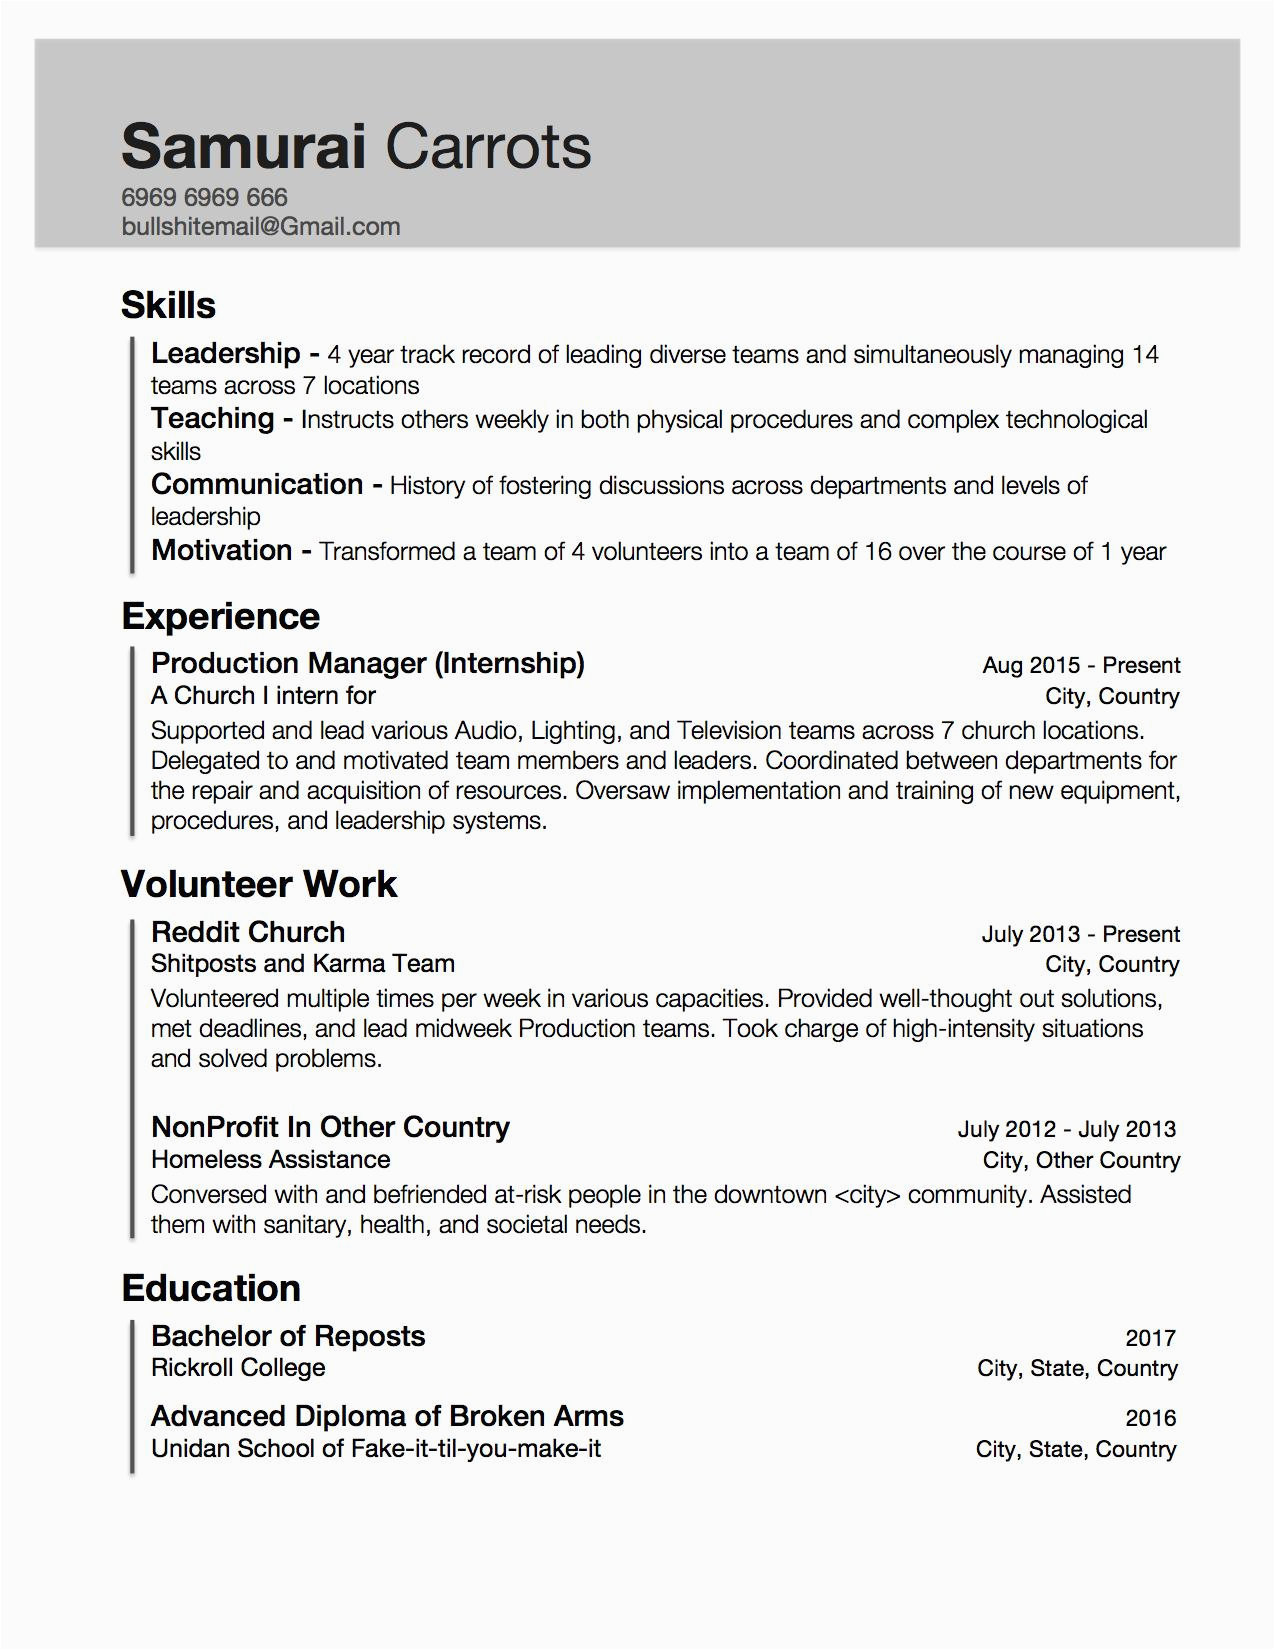 Resume Samples with Little Work Experience Resume with Little Work Experience but Skills Acquired